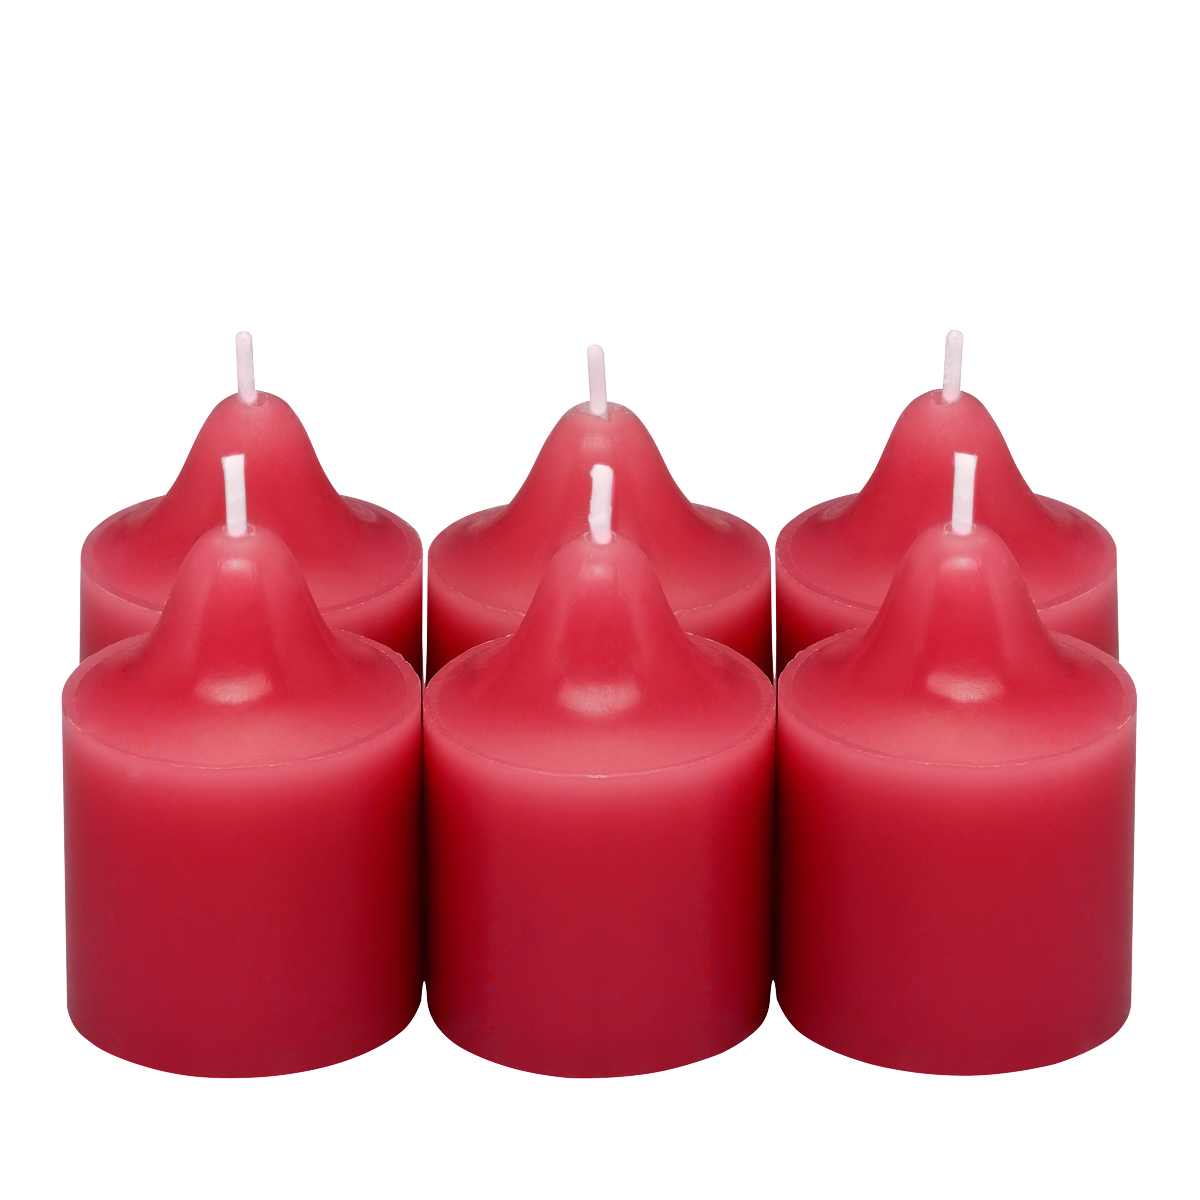 Winter Berries Scented Votive Candles - PartyLite US